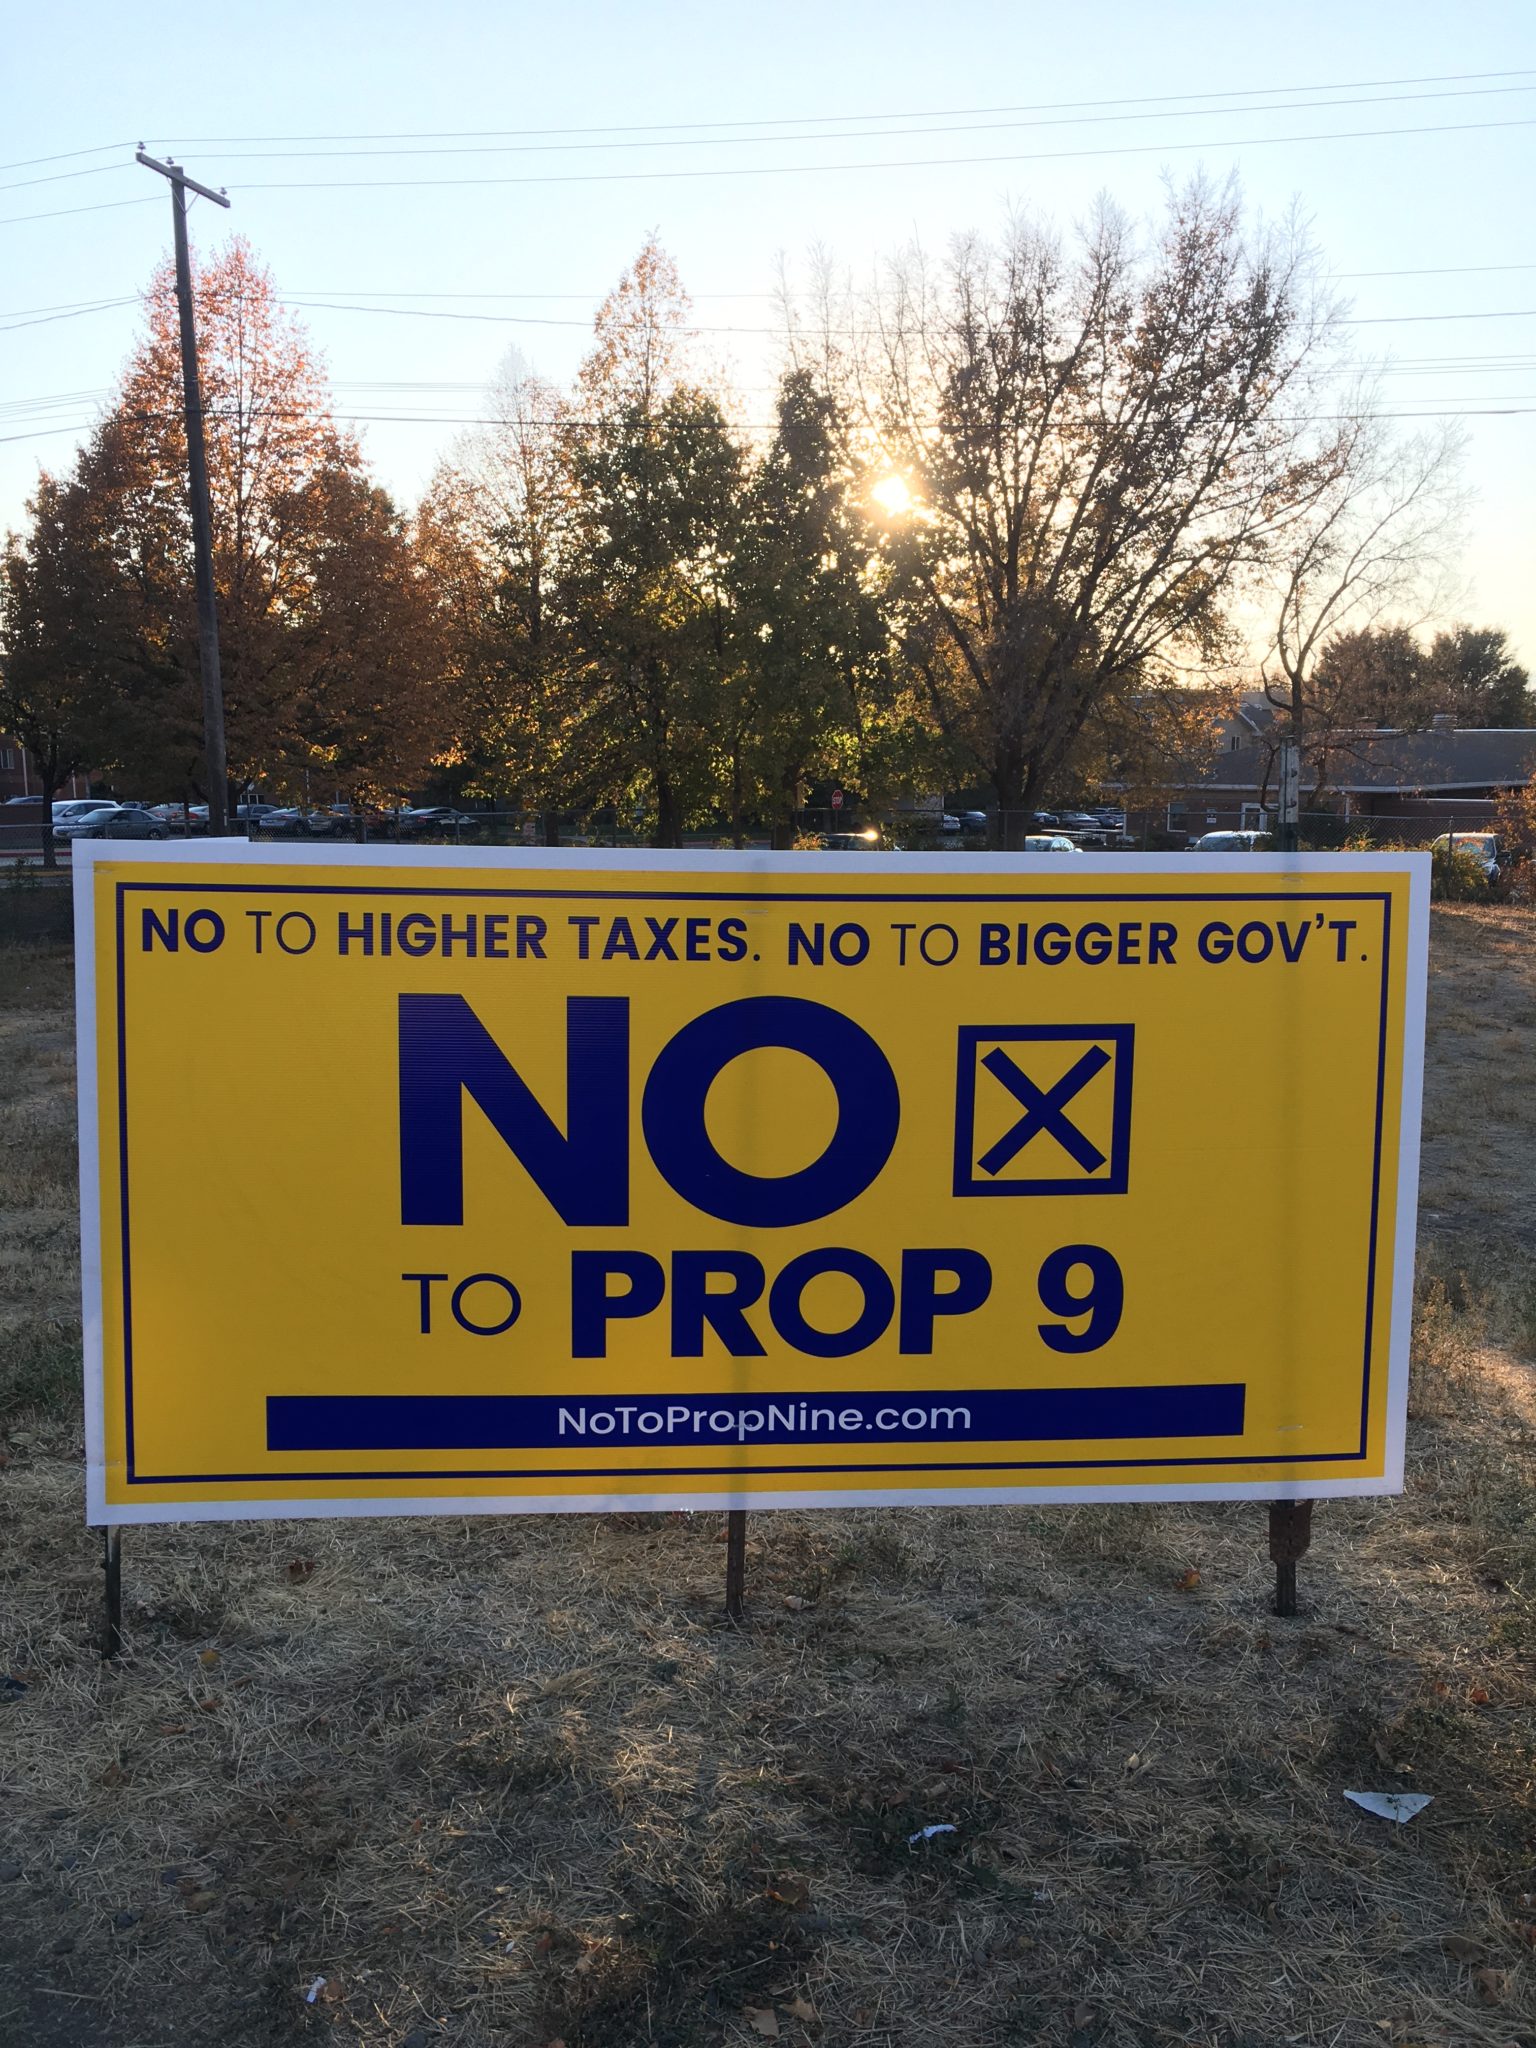 Prop 9 could change form of Utah County government The Daily Universe